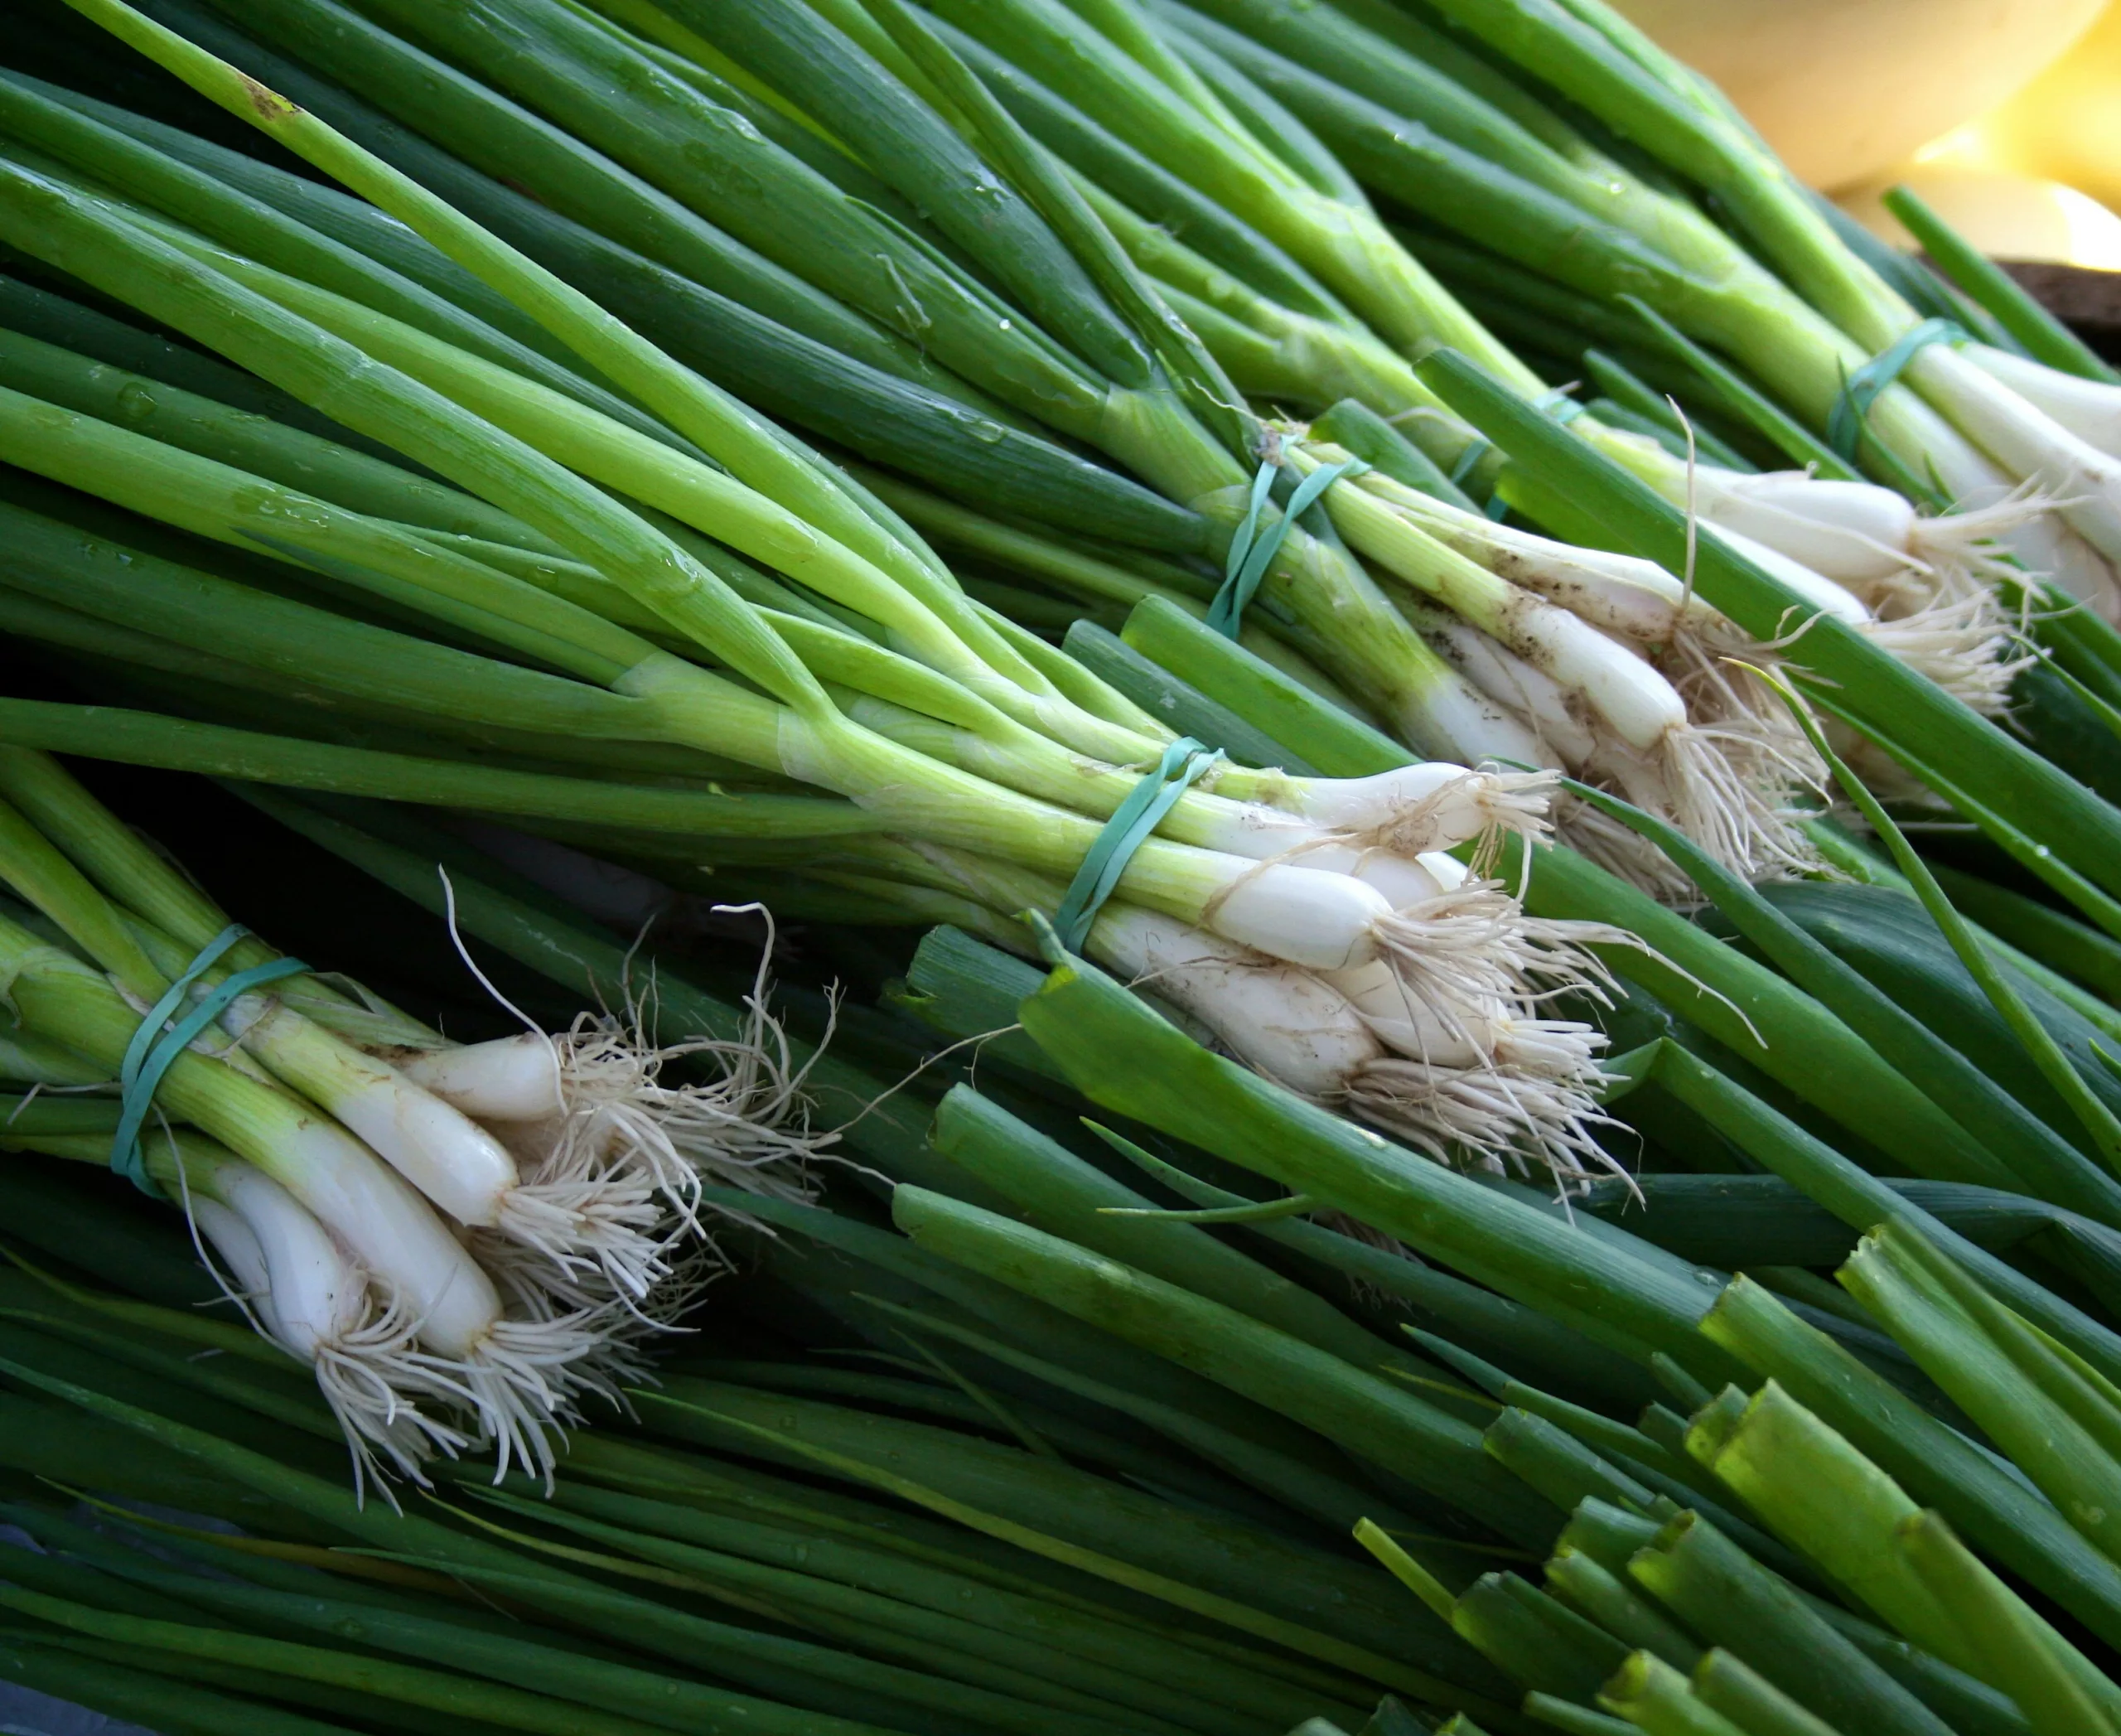 The Green Guide: How to Cut Green Onions Sustainably with Zero Waste